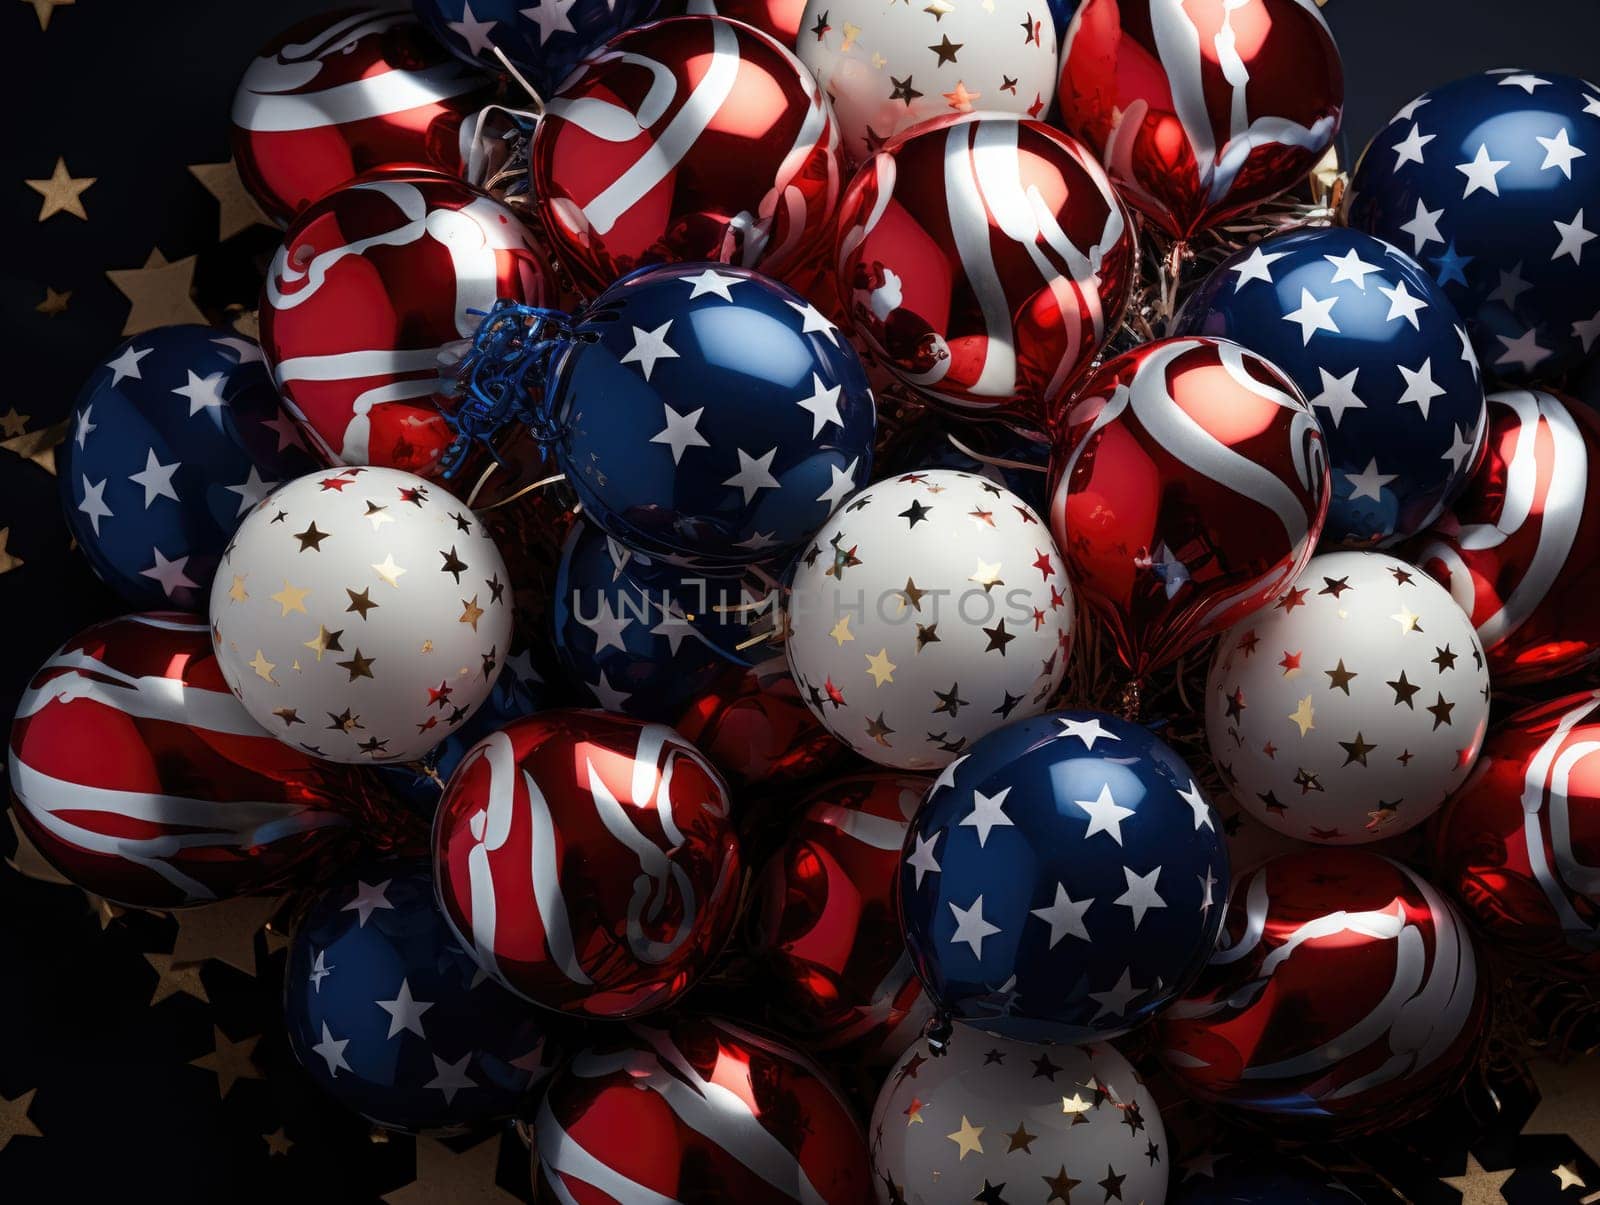 Red, White, and Blue Ornaments Piled Together by but_photo